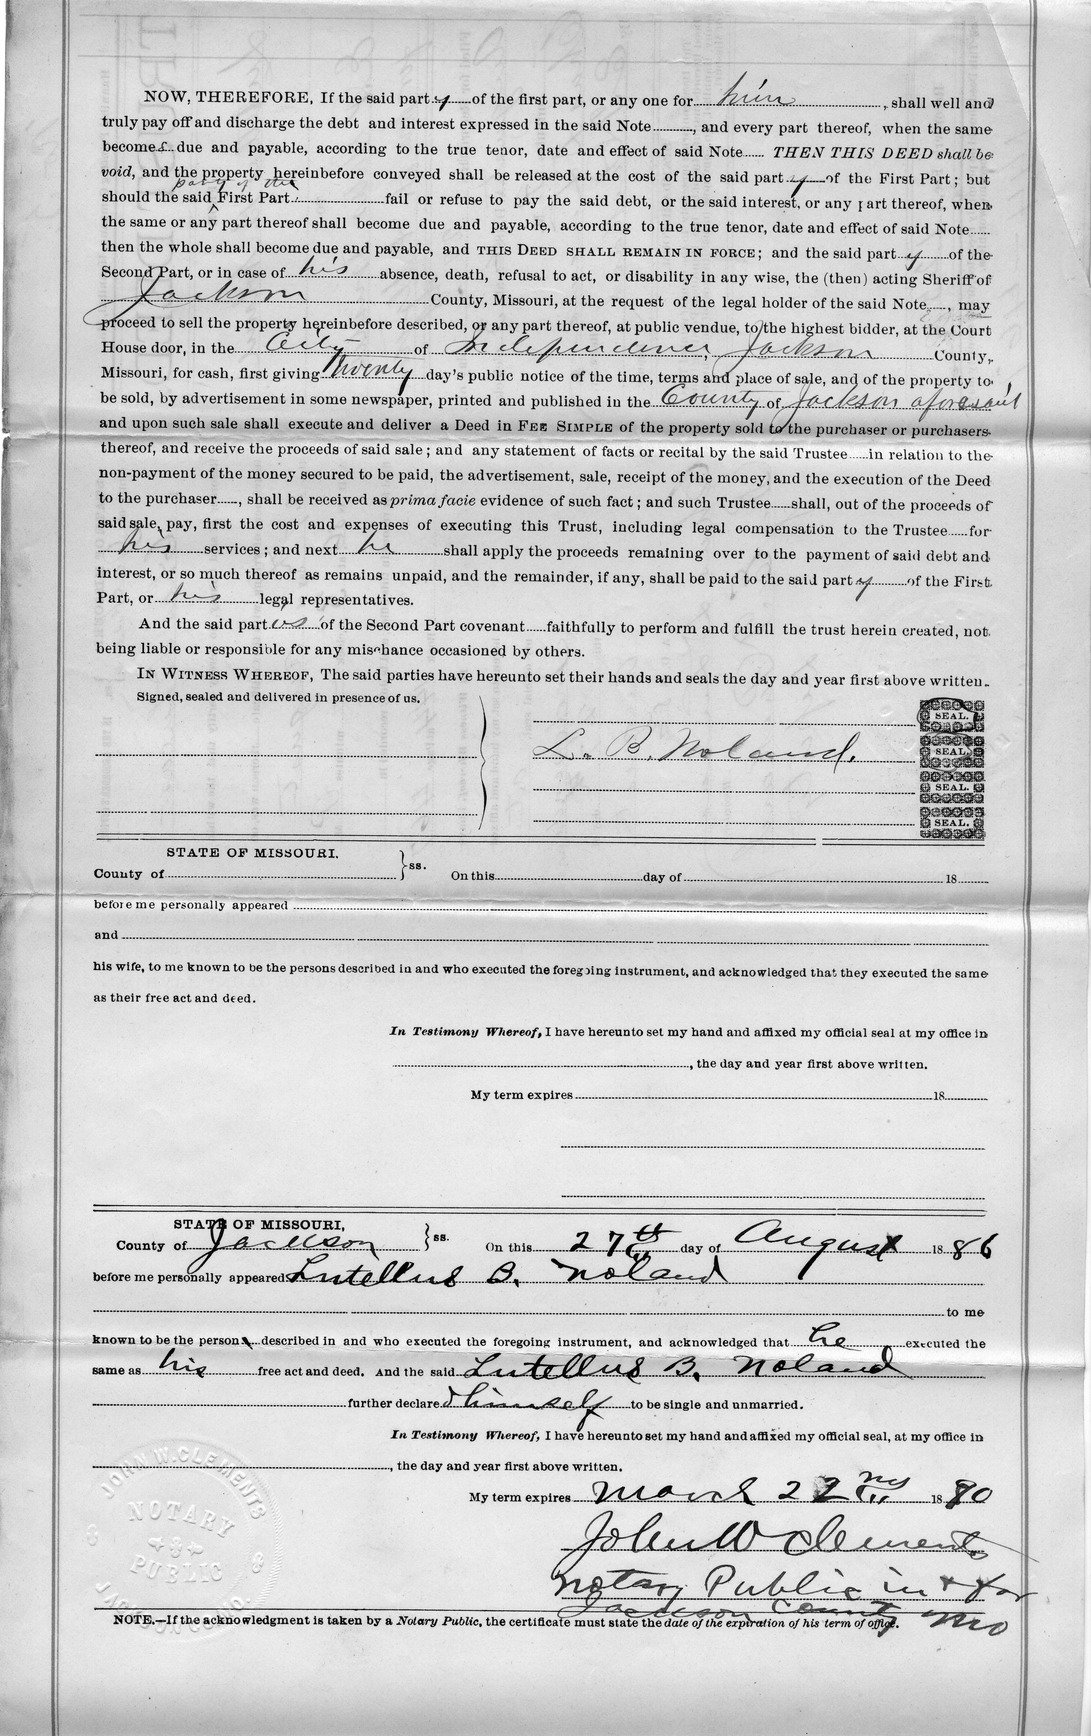 Trust Deed from Lutellus B. Noland to E. P. Gates